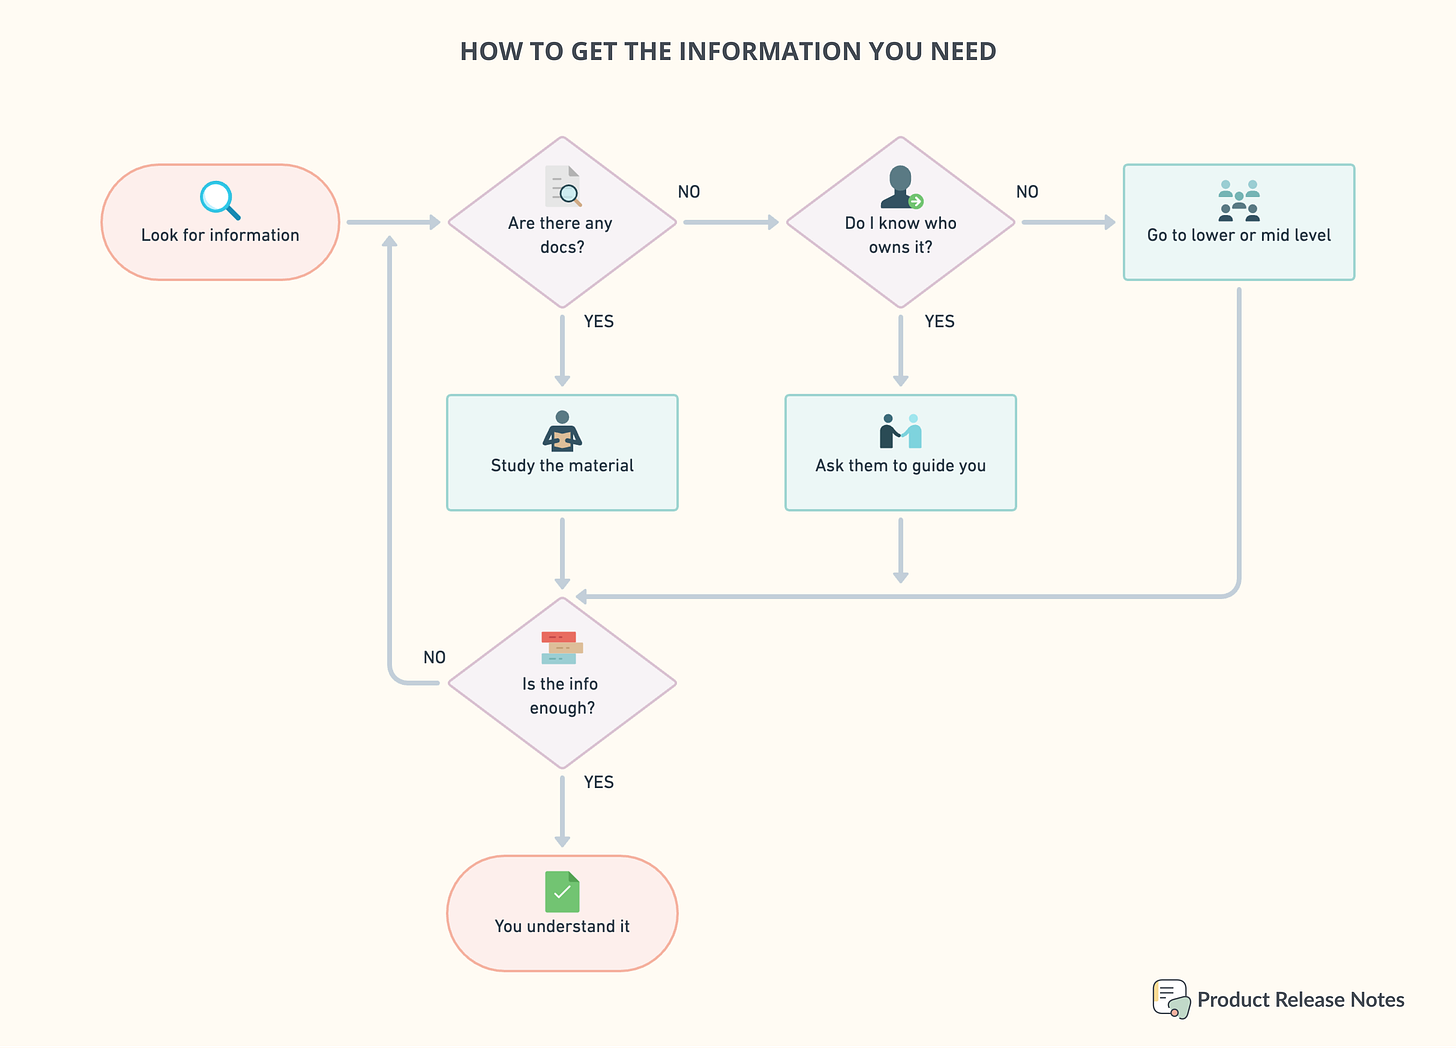 How to Get the Information You Need